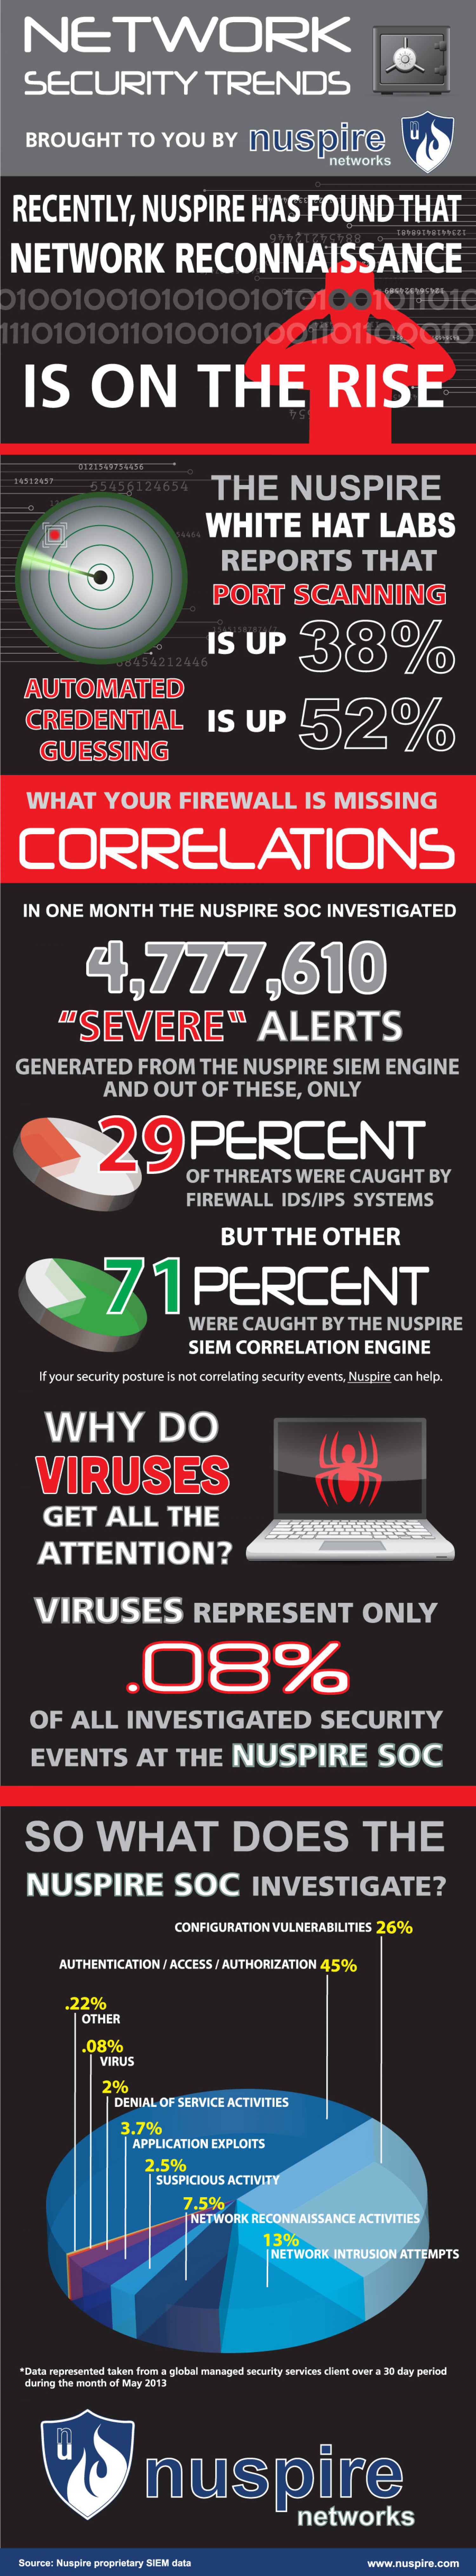 Network Security Trends Infographic